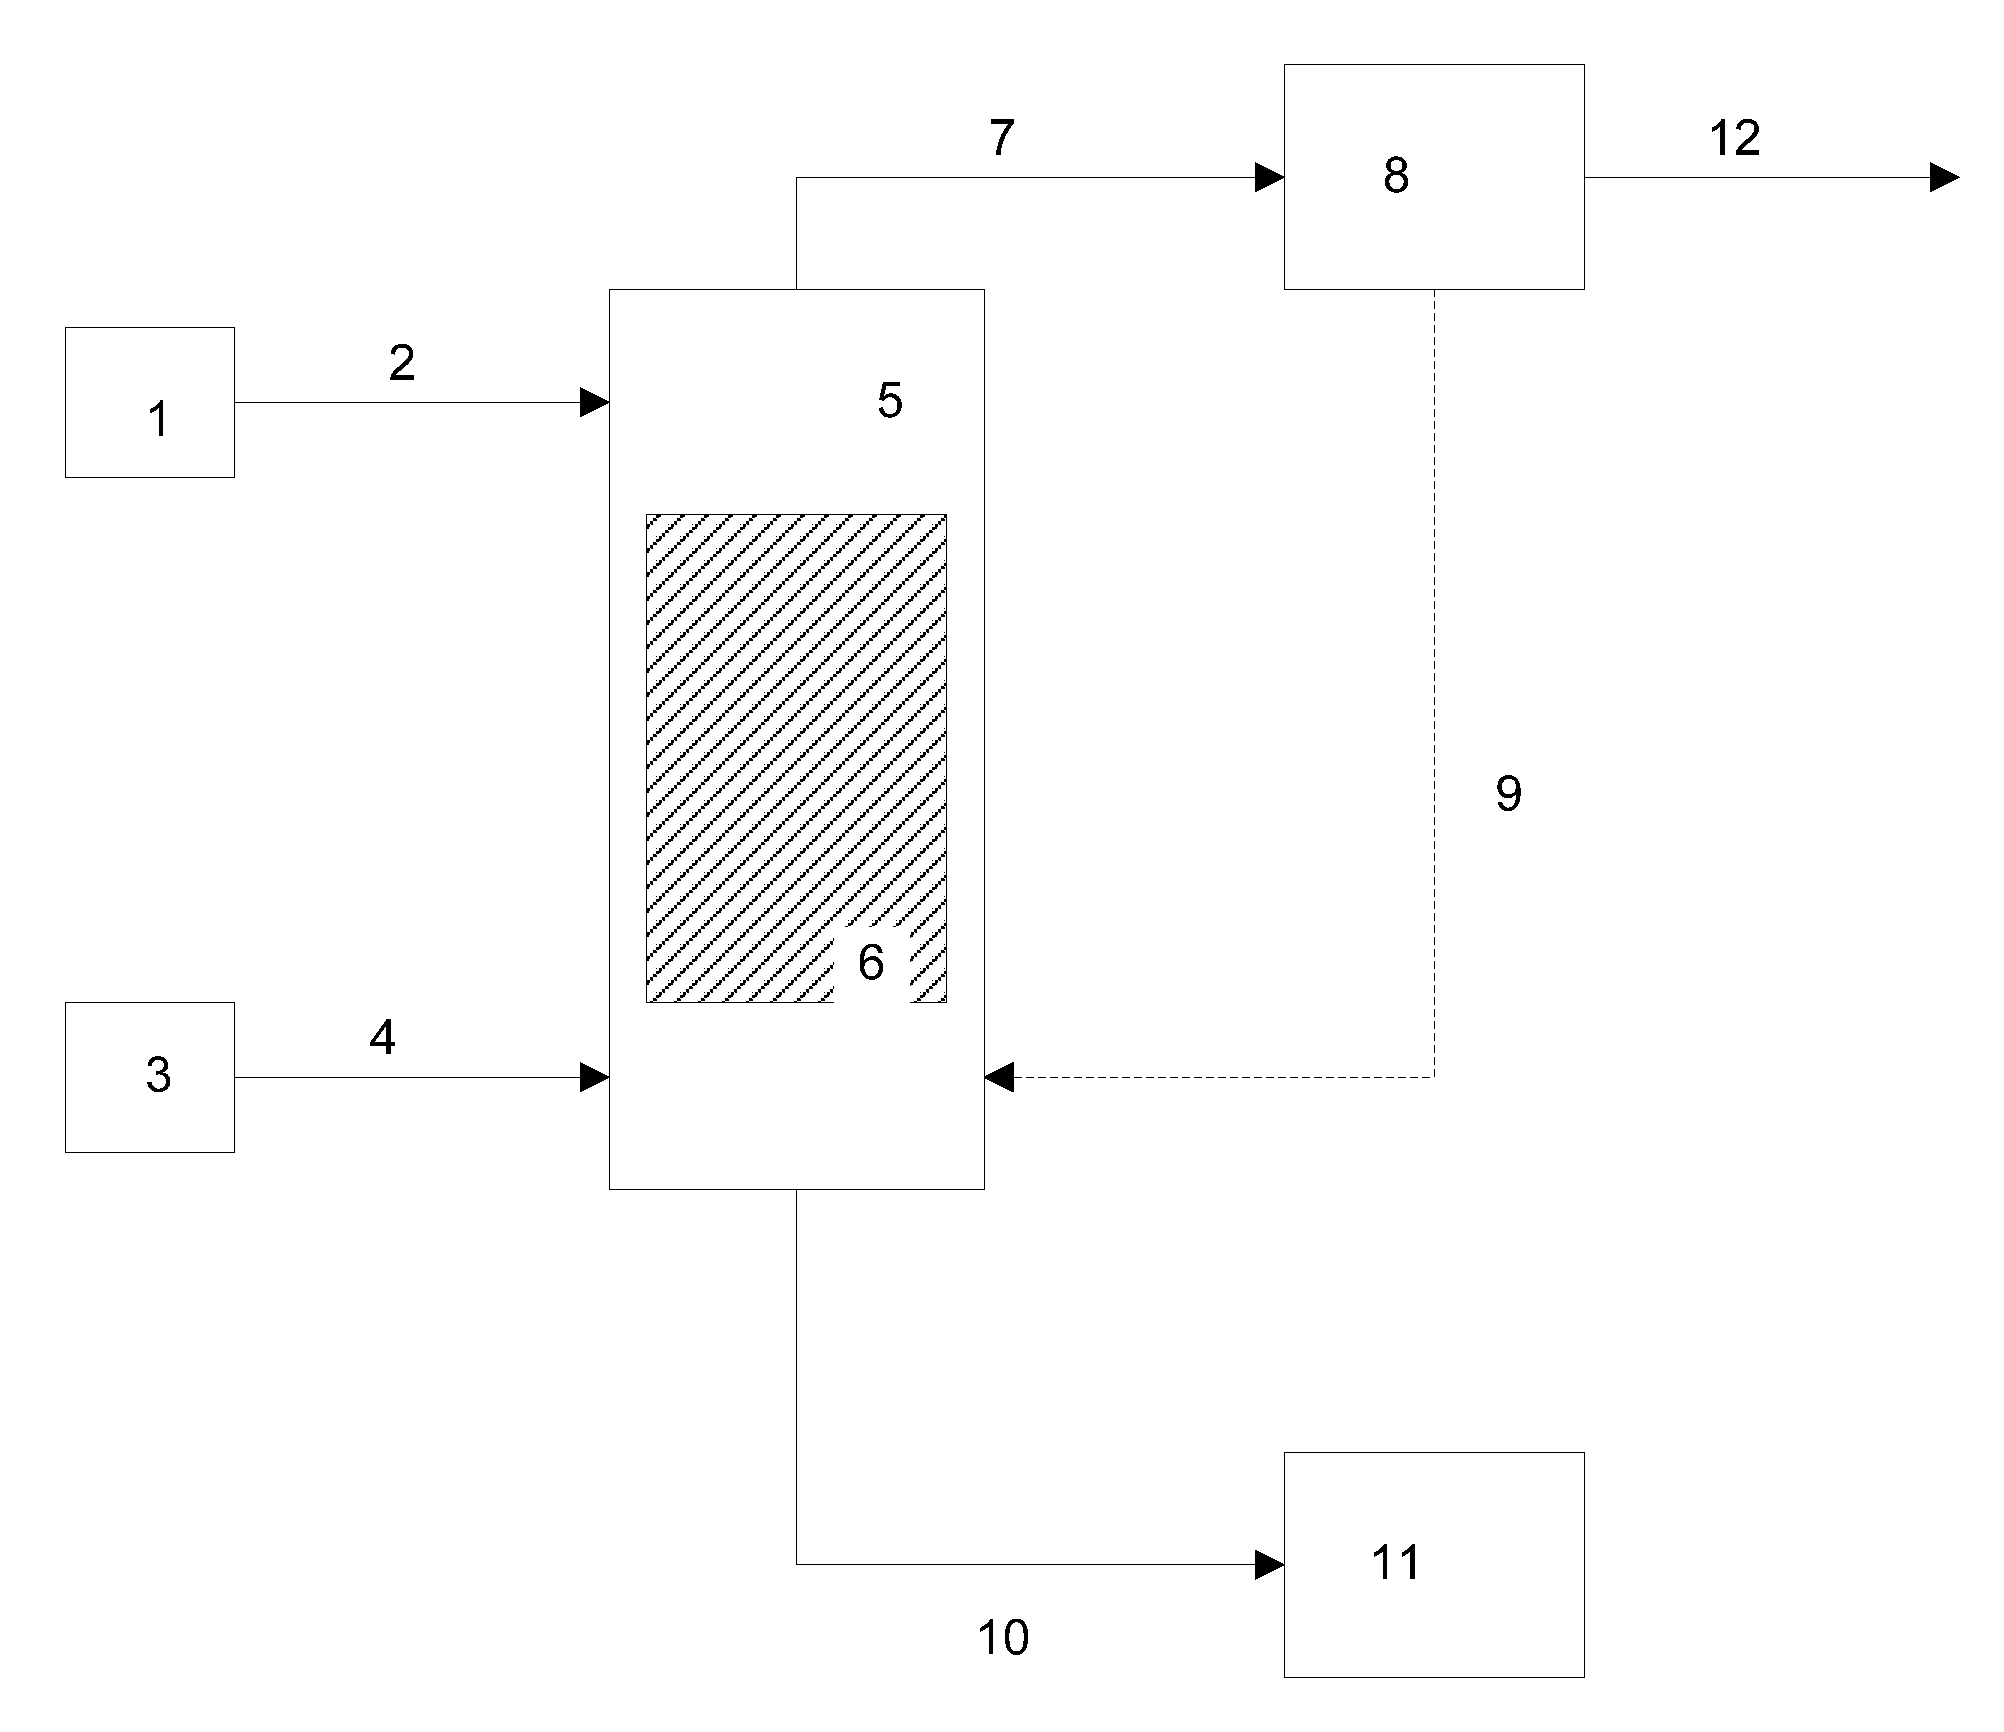 Method for Obtaining Biodiesel, Alternative Fuels and Renewable Fuels Tax Credits and Treatment